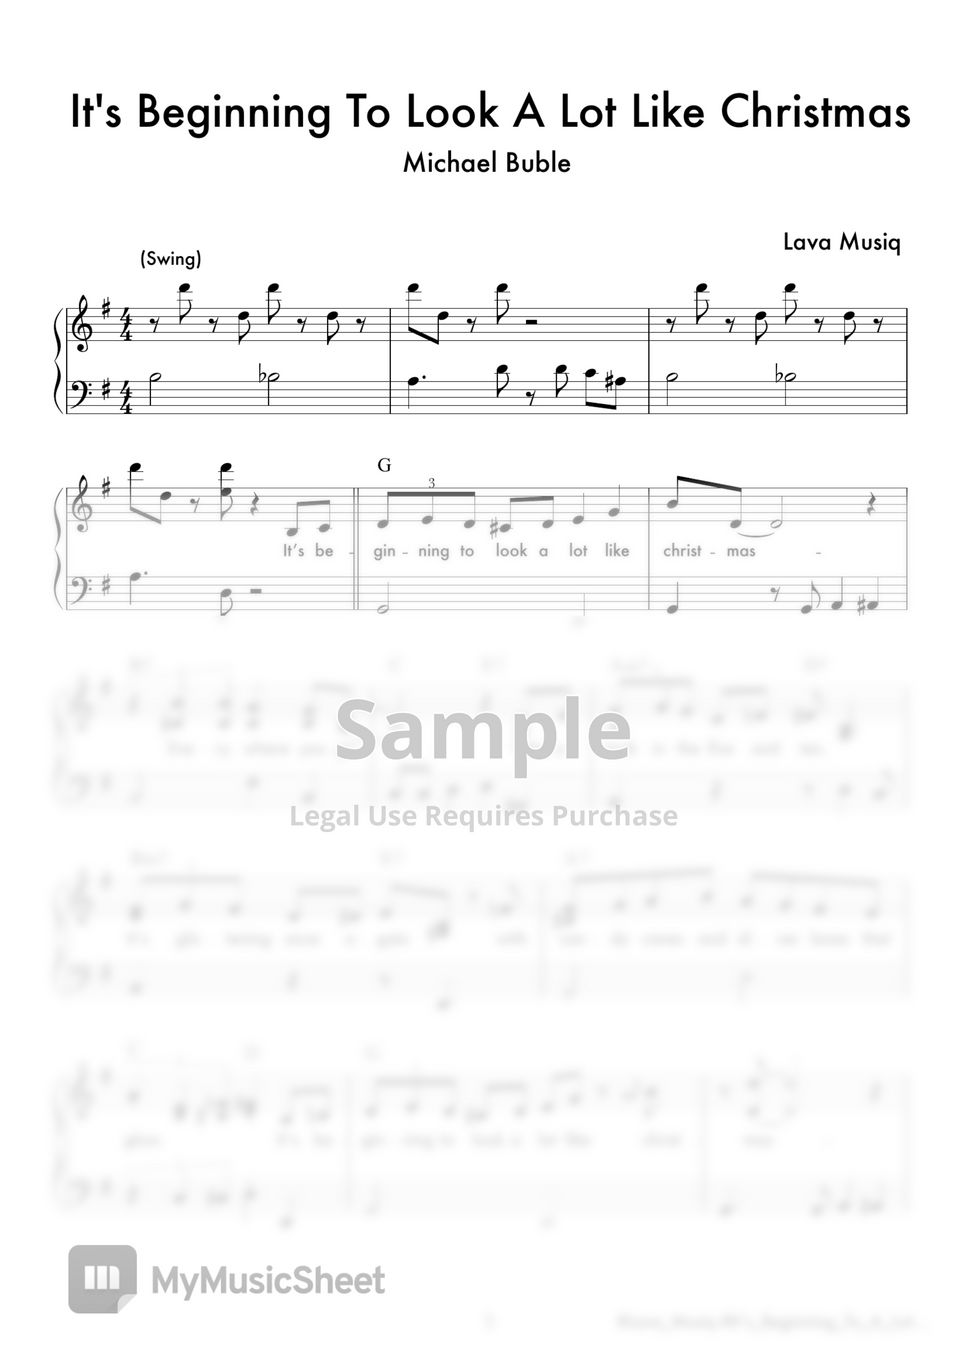 Michael Buble - It's Beginning To Look A Lot Like Christmas (Easy piano sheet) by Lava